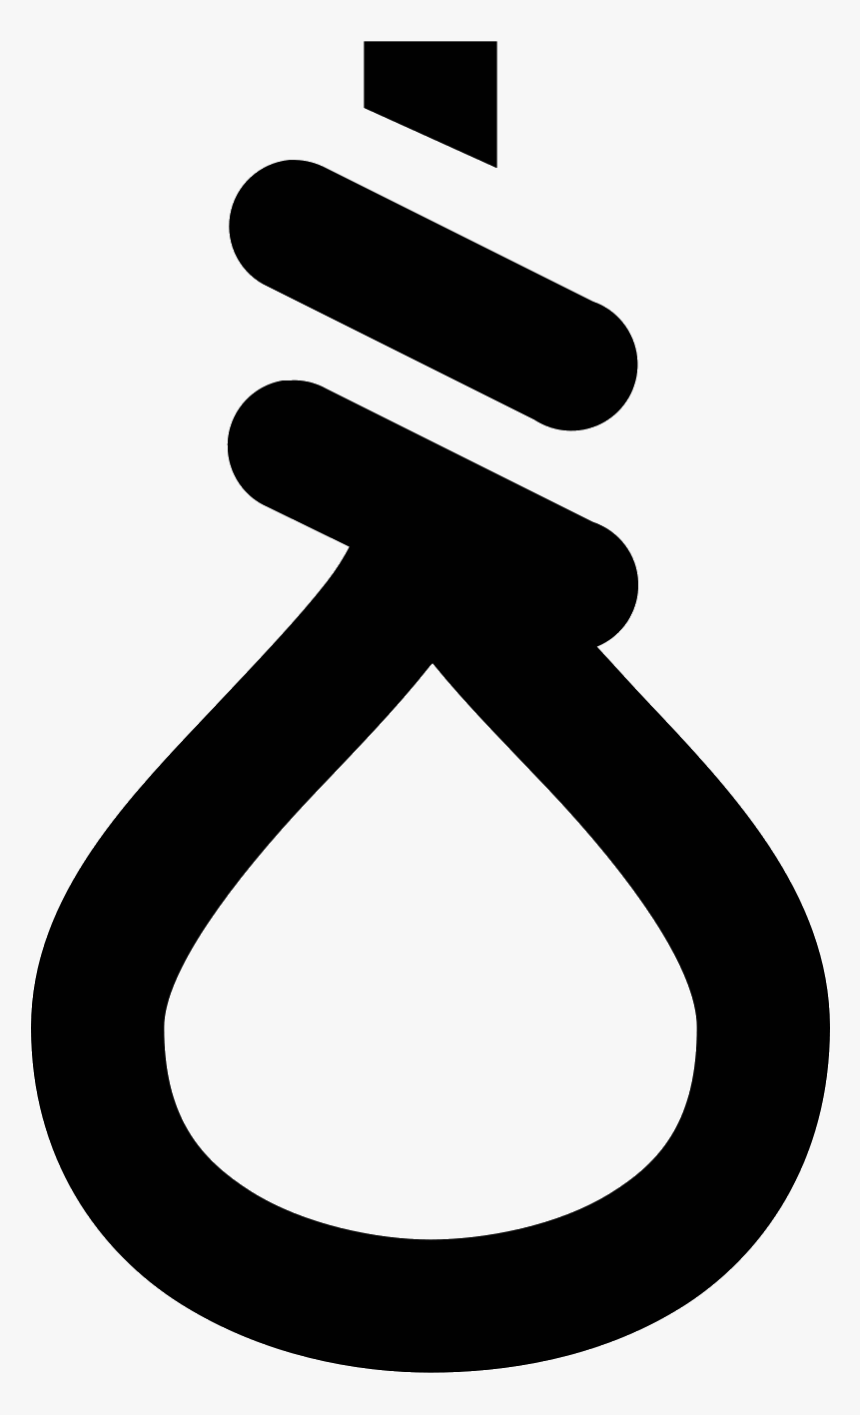 This Icon Resembles A Typical Hangman"s Noose - Hangman Icon Png, Transparent Png, Free Download